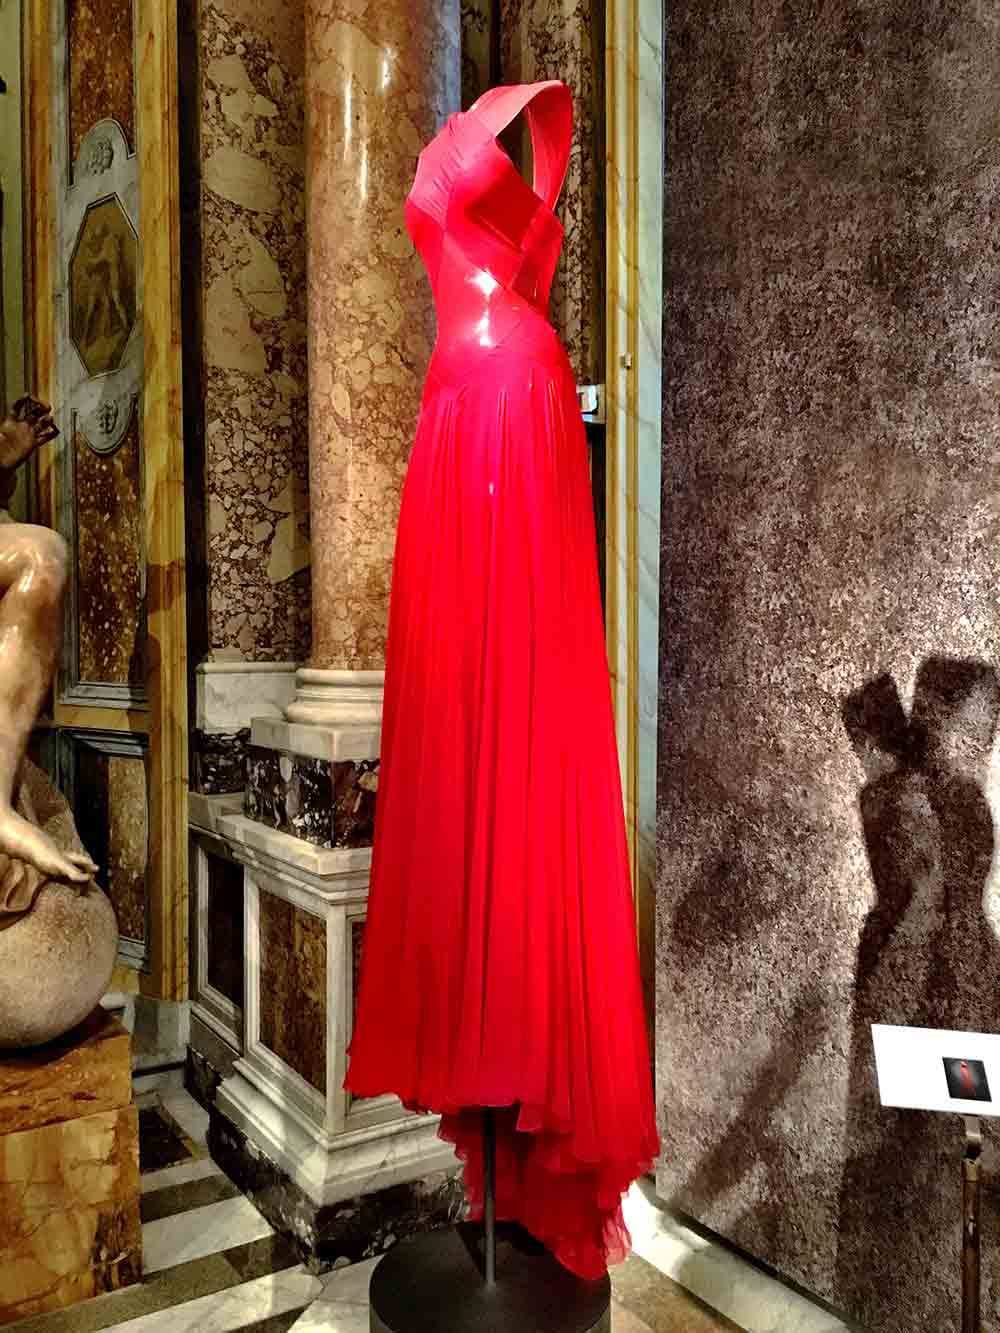 An Enchanted Afternoon of Italian Paintings, Sculpture, and Fashion ...